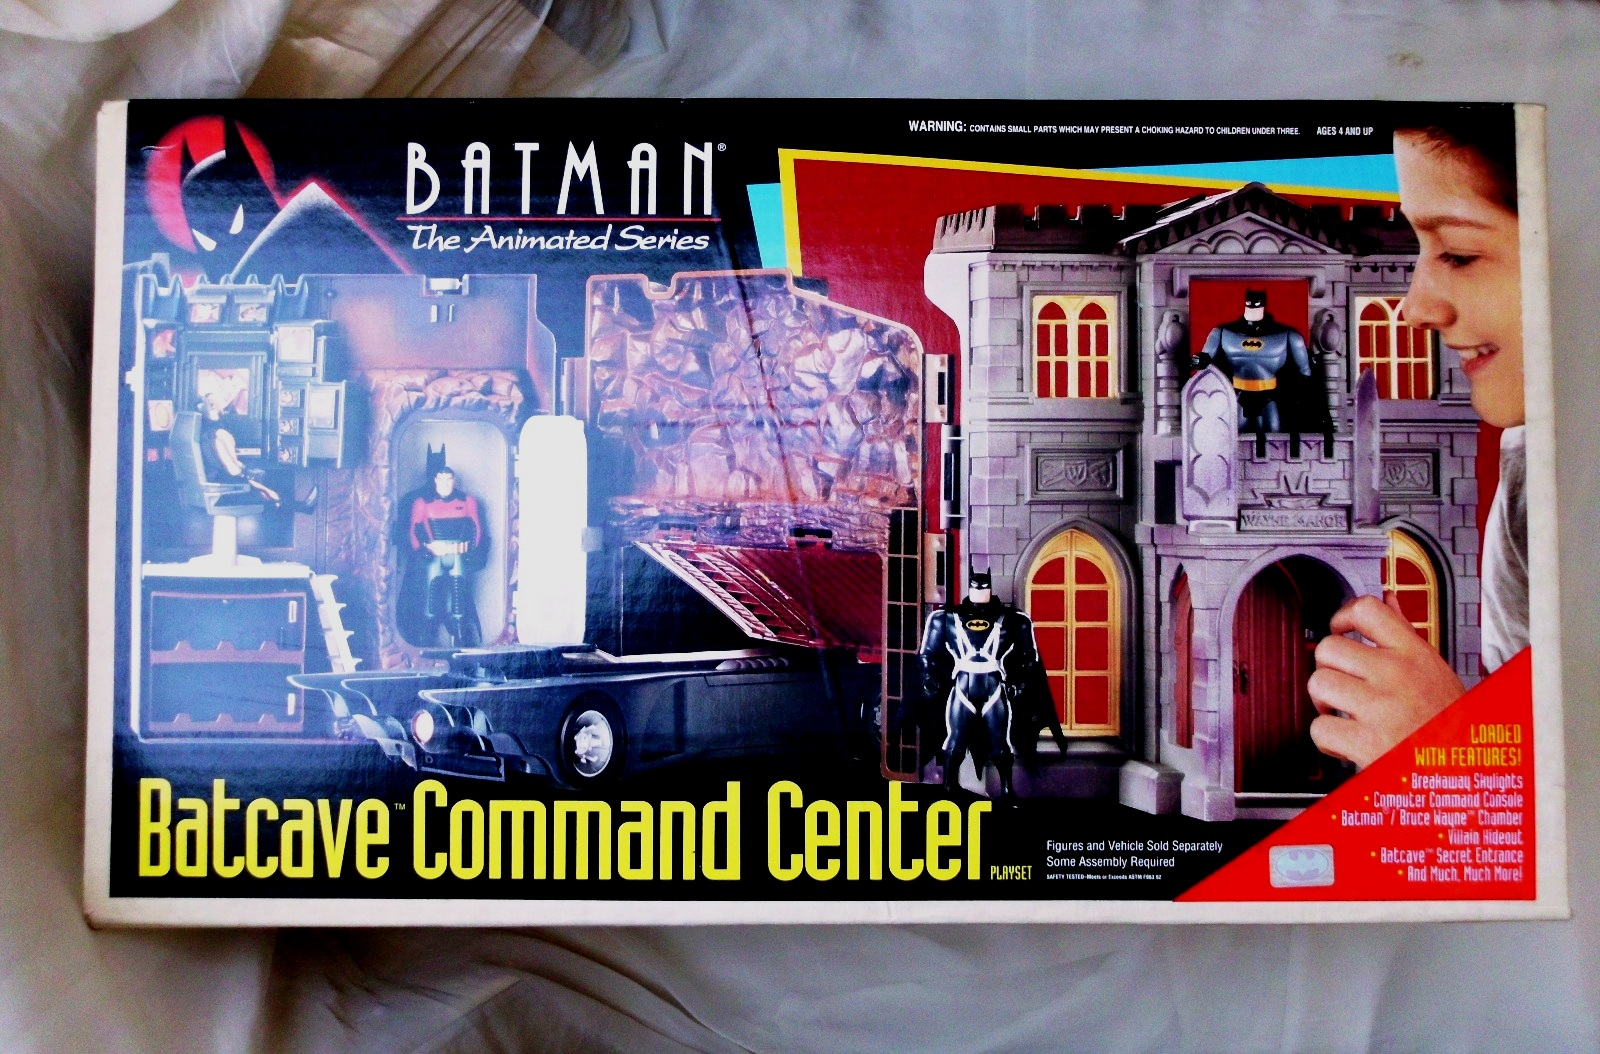 Batman Batcave Command Center The Animated Series Kenner Original Action Playset Rare Vintage 1993 Now And Then Collectibles